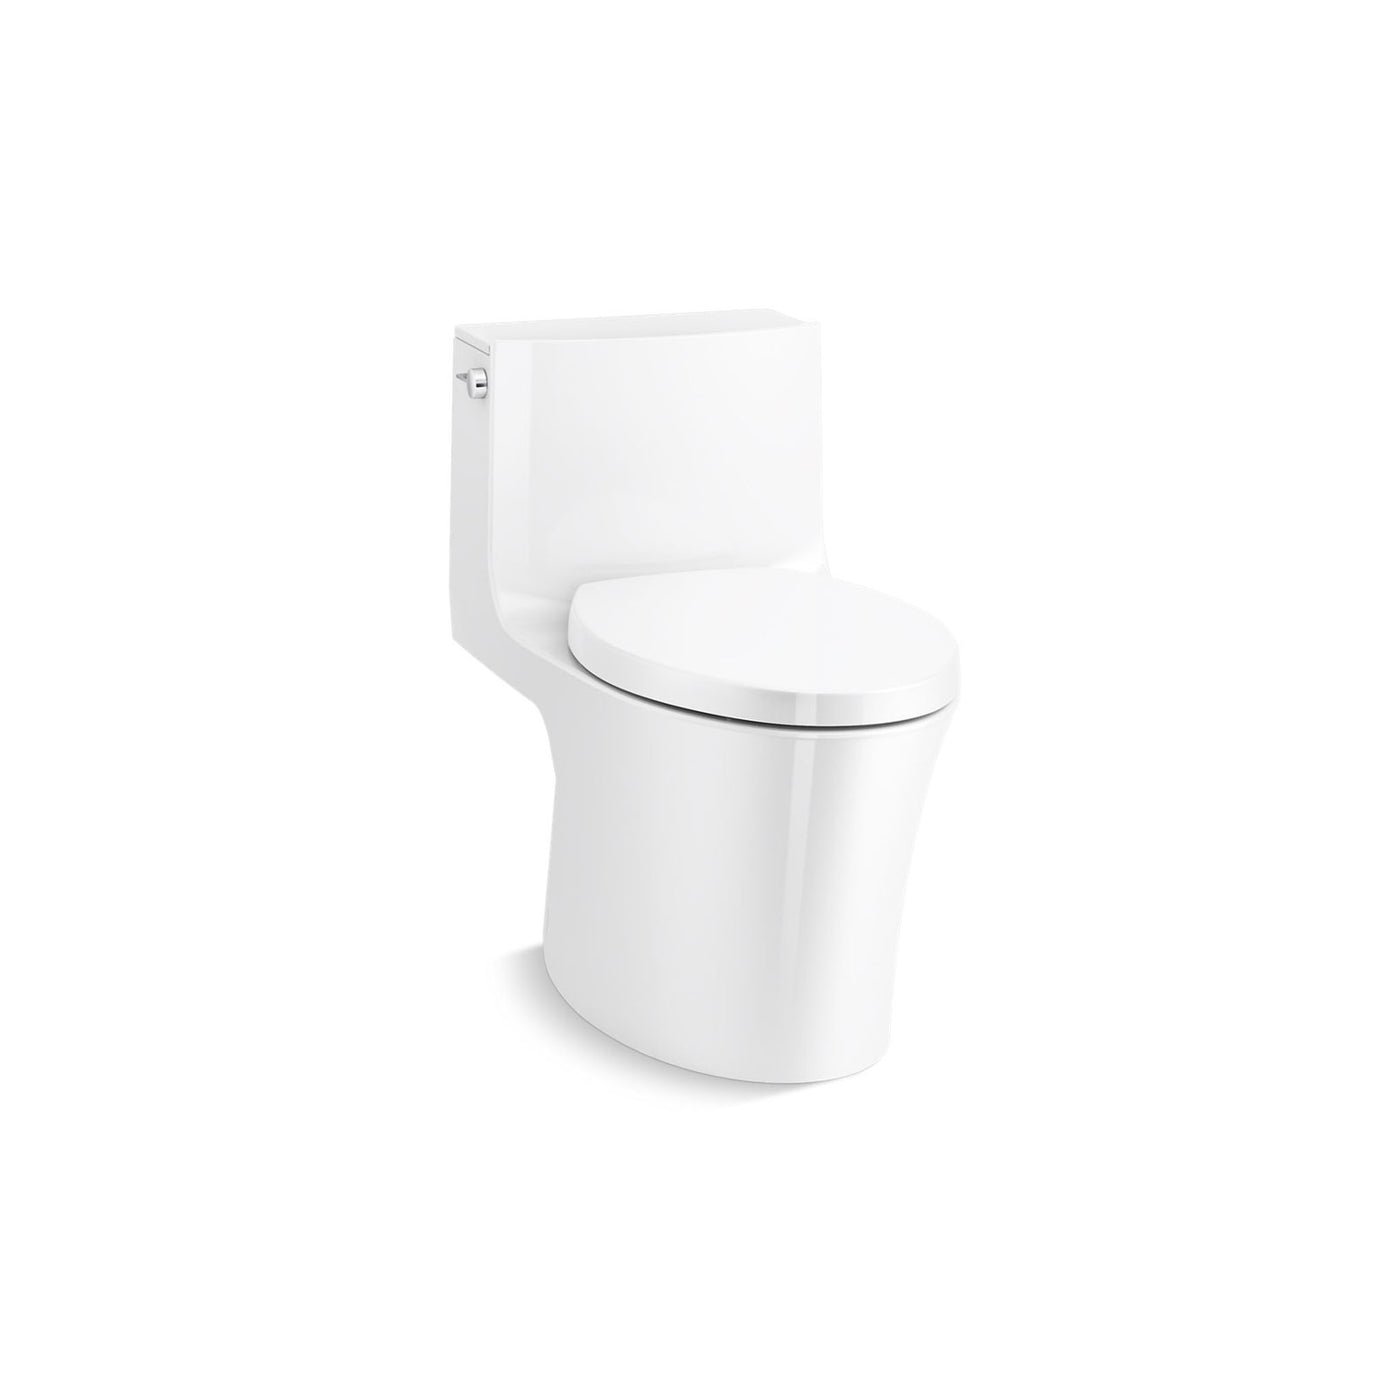 Veil® One-piece elongated toilet with skirted trapway, dual-flush